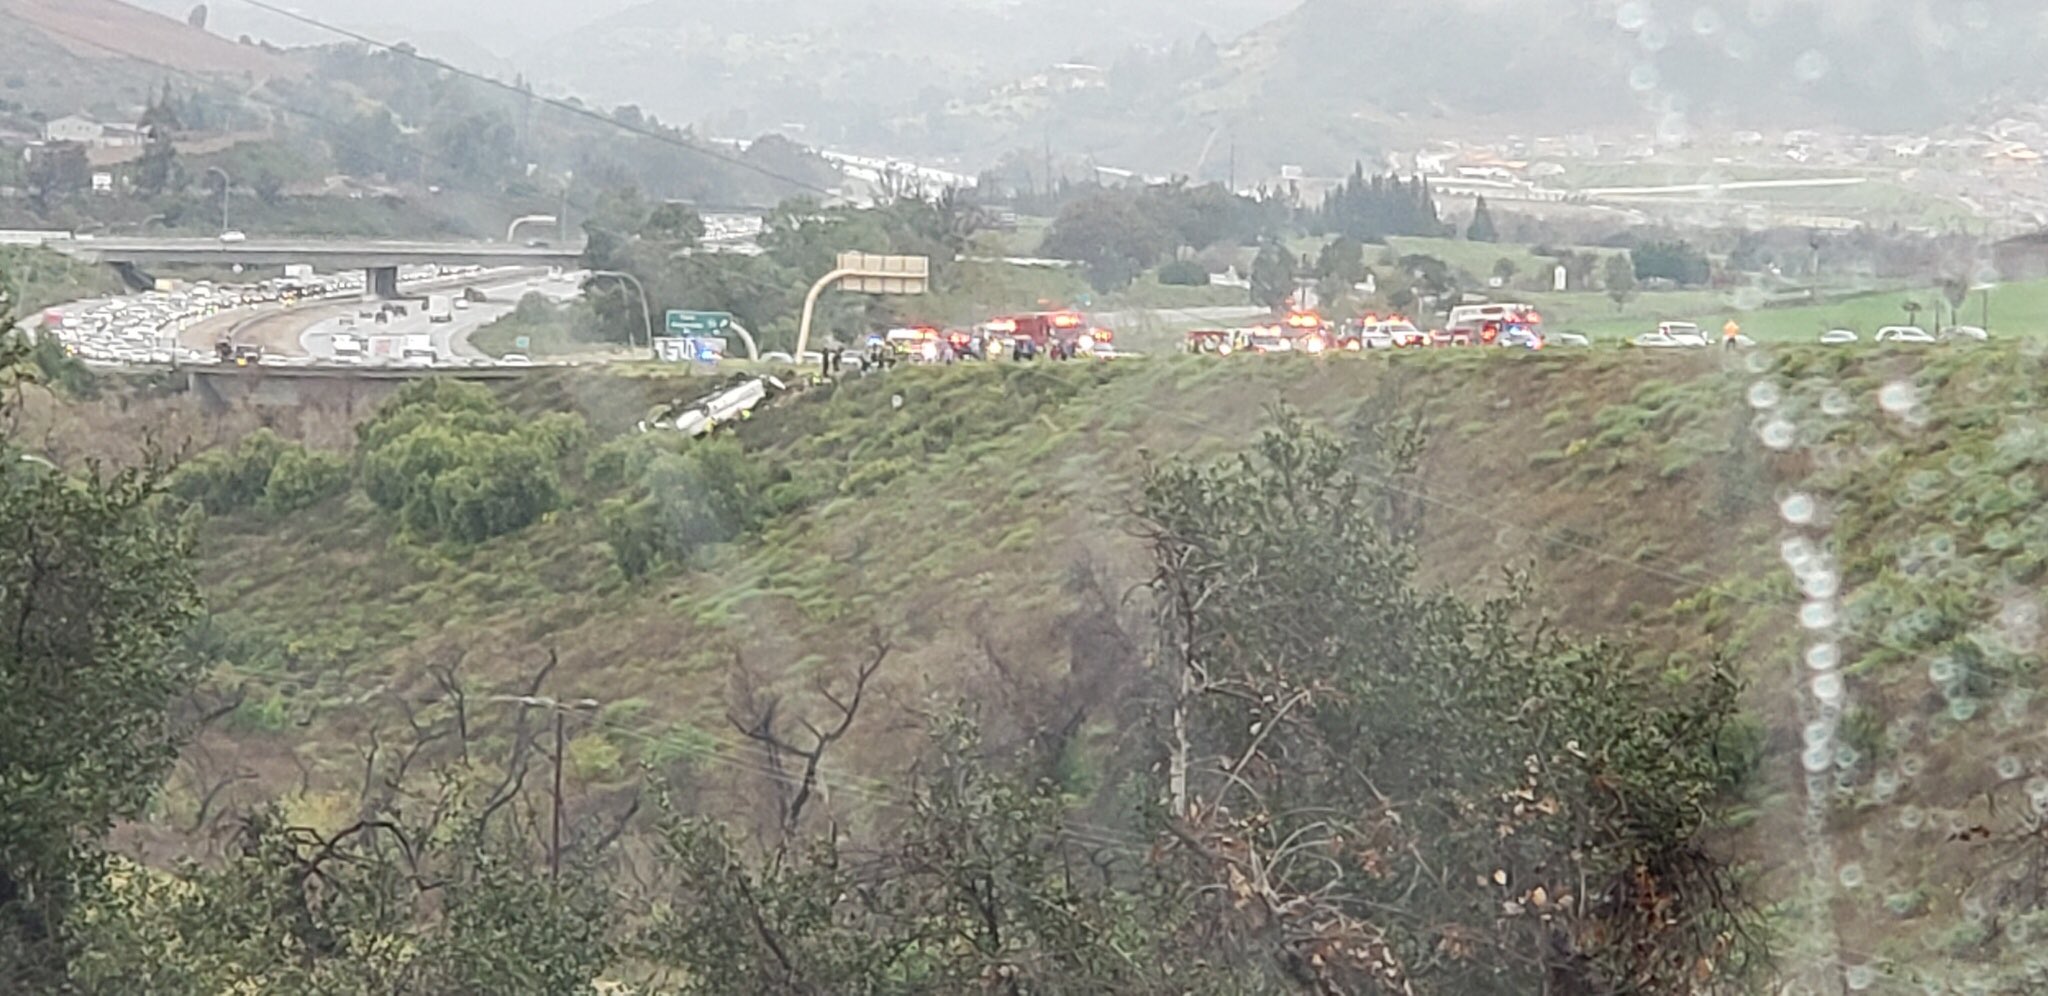 A bus rolled over on the southbound side of I-15, trapping multiple people and killing at least 3, according to officials, in Fallbrook, Calif., on Feb. 22, 2020. (North County Fire Department)